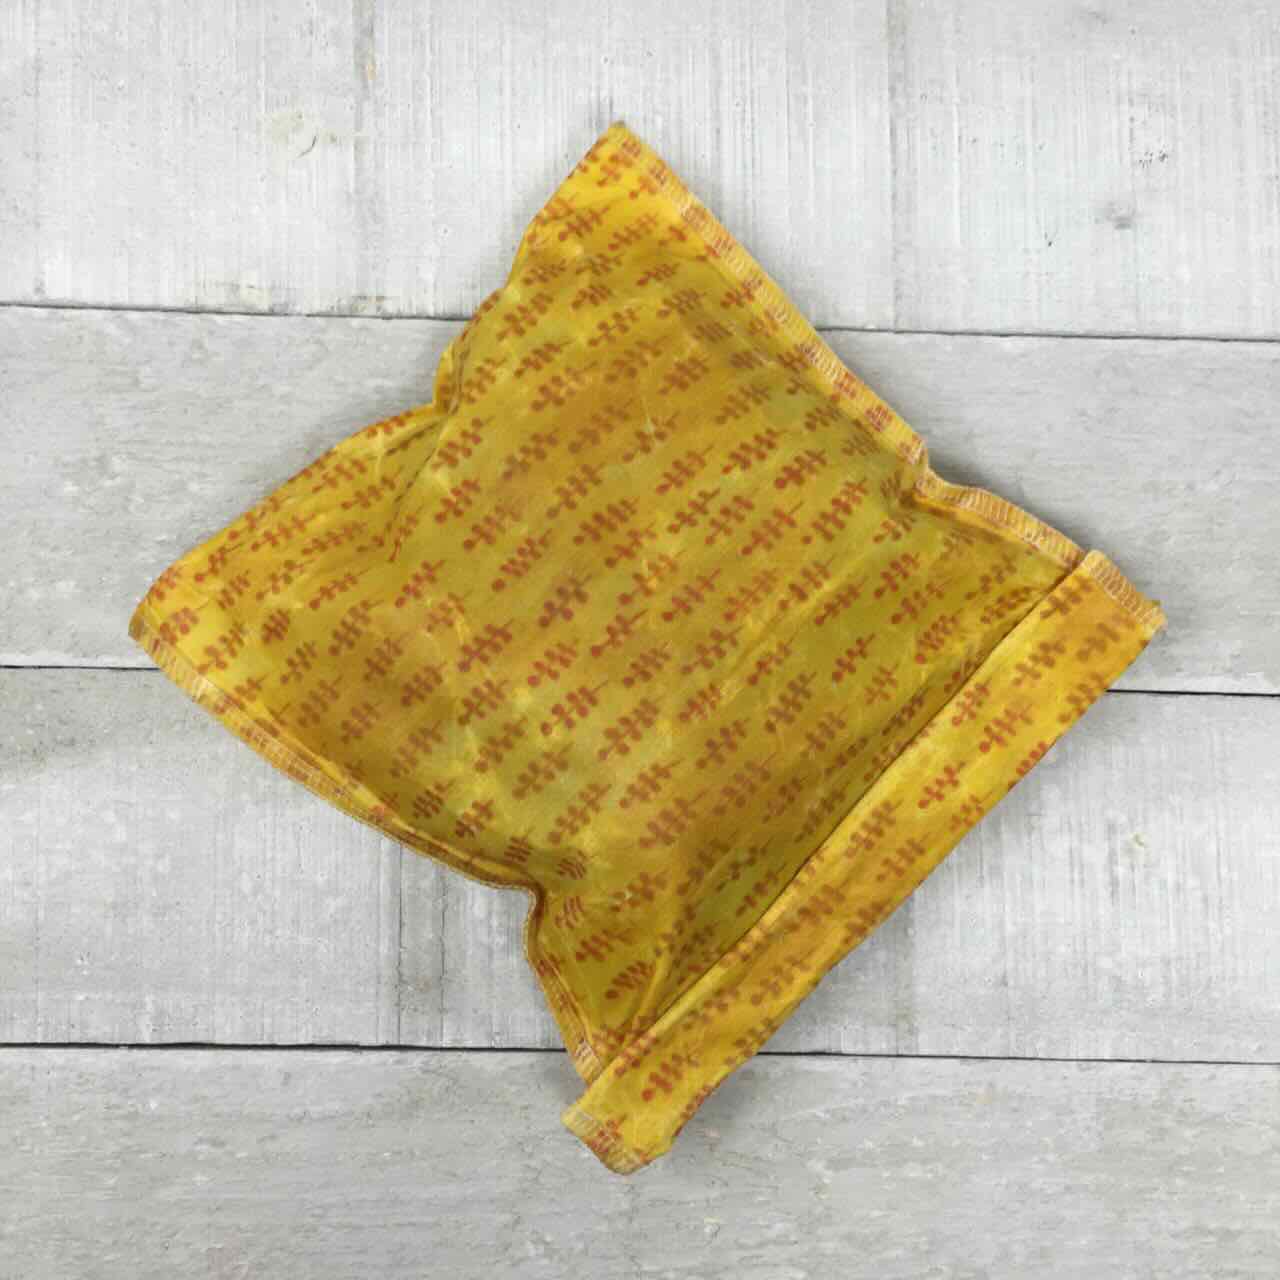 Yellow beeswax wrap with red pepper